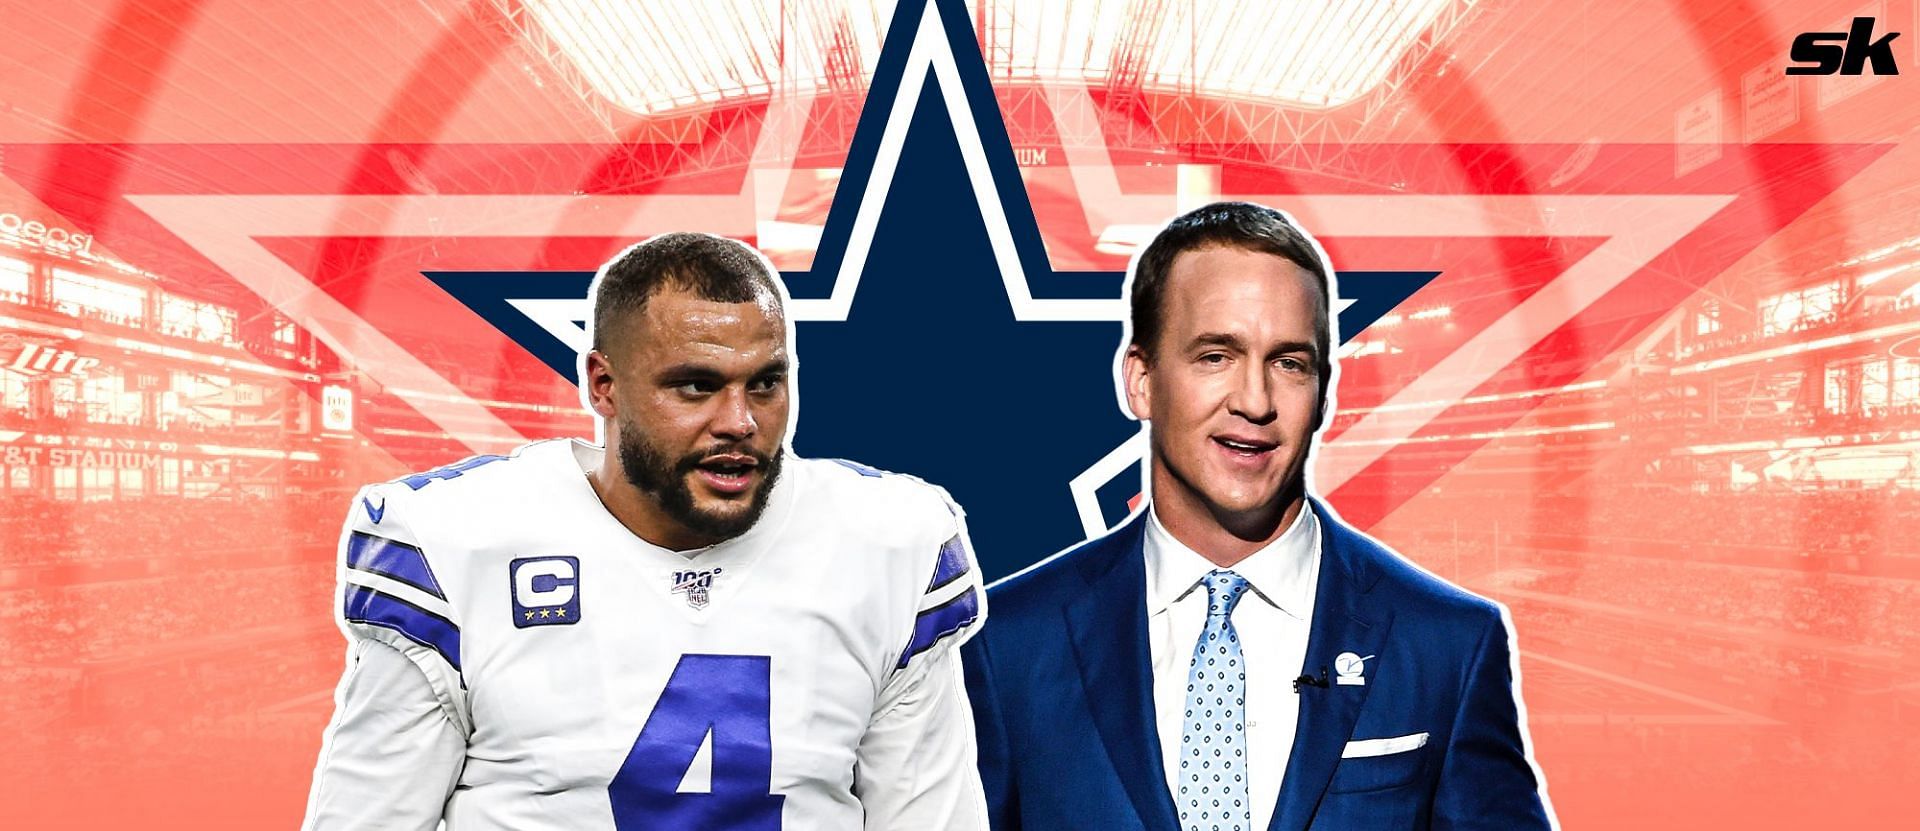 2x Super Bowl champion Peyton Manning gets candid on Dak Prescott&rsquo;s situation with Cowboys ahead of playoffs